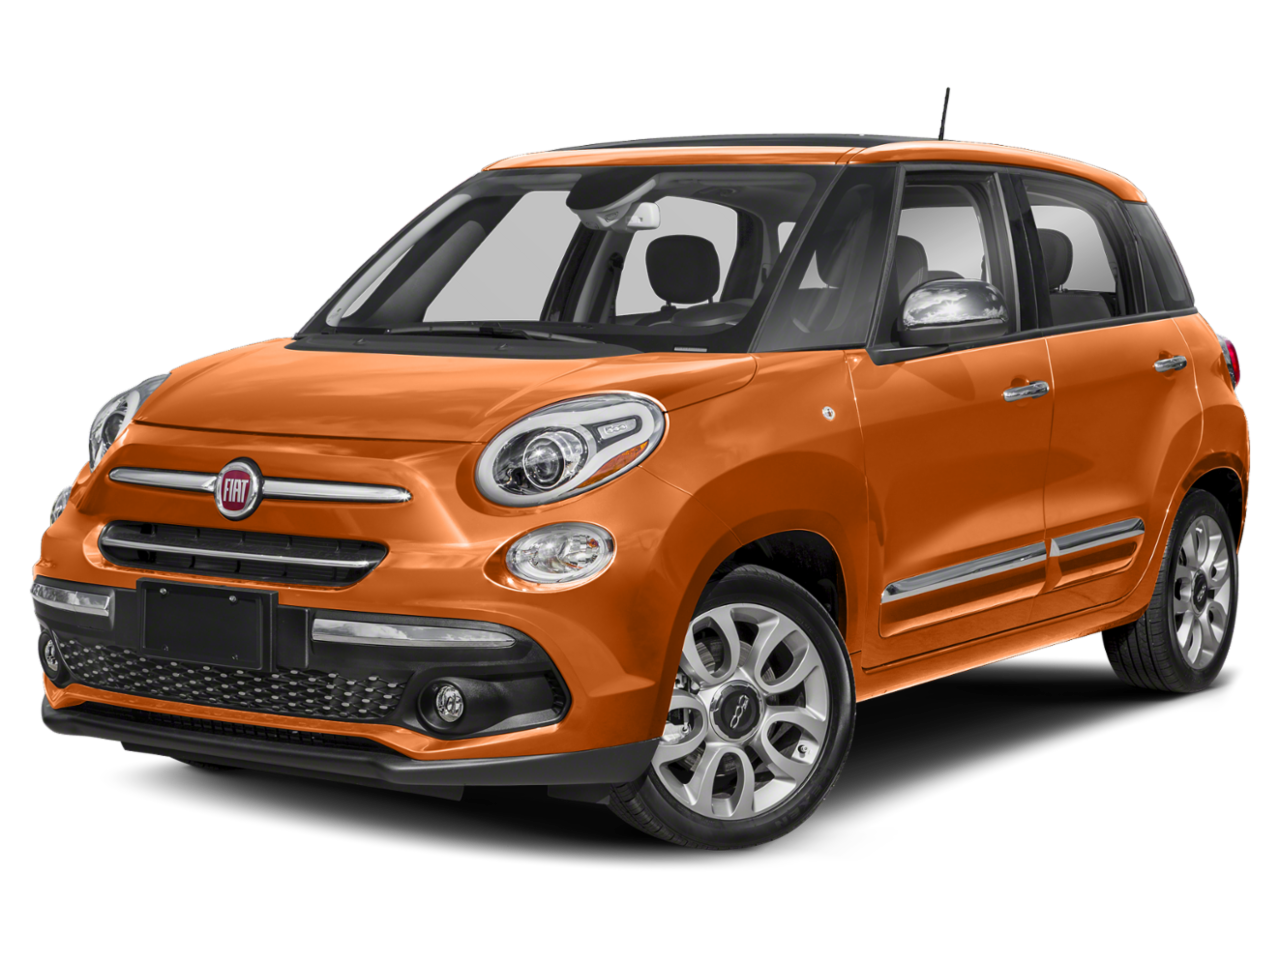 Fiat 500L Repair: Service and Maintenance Cost